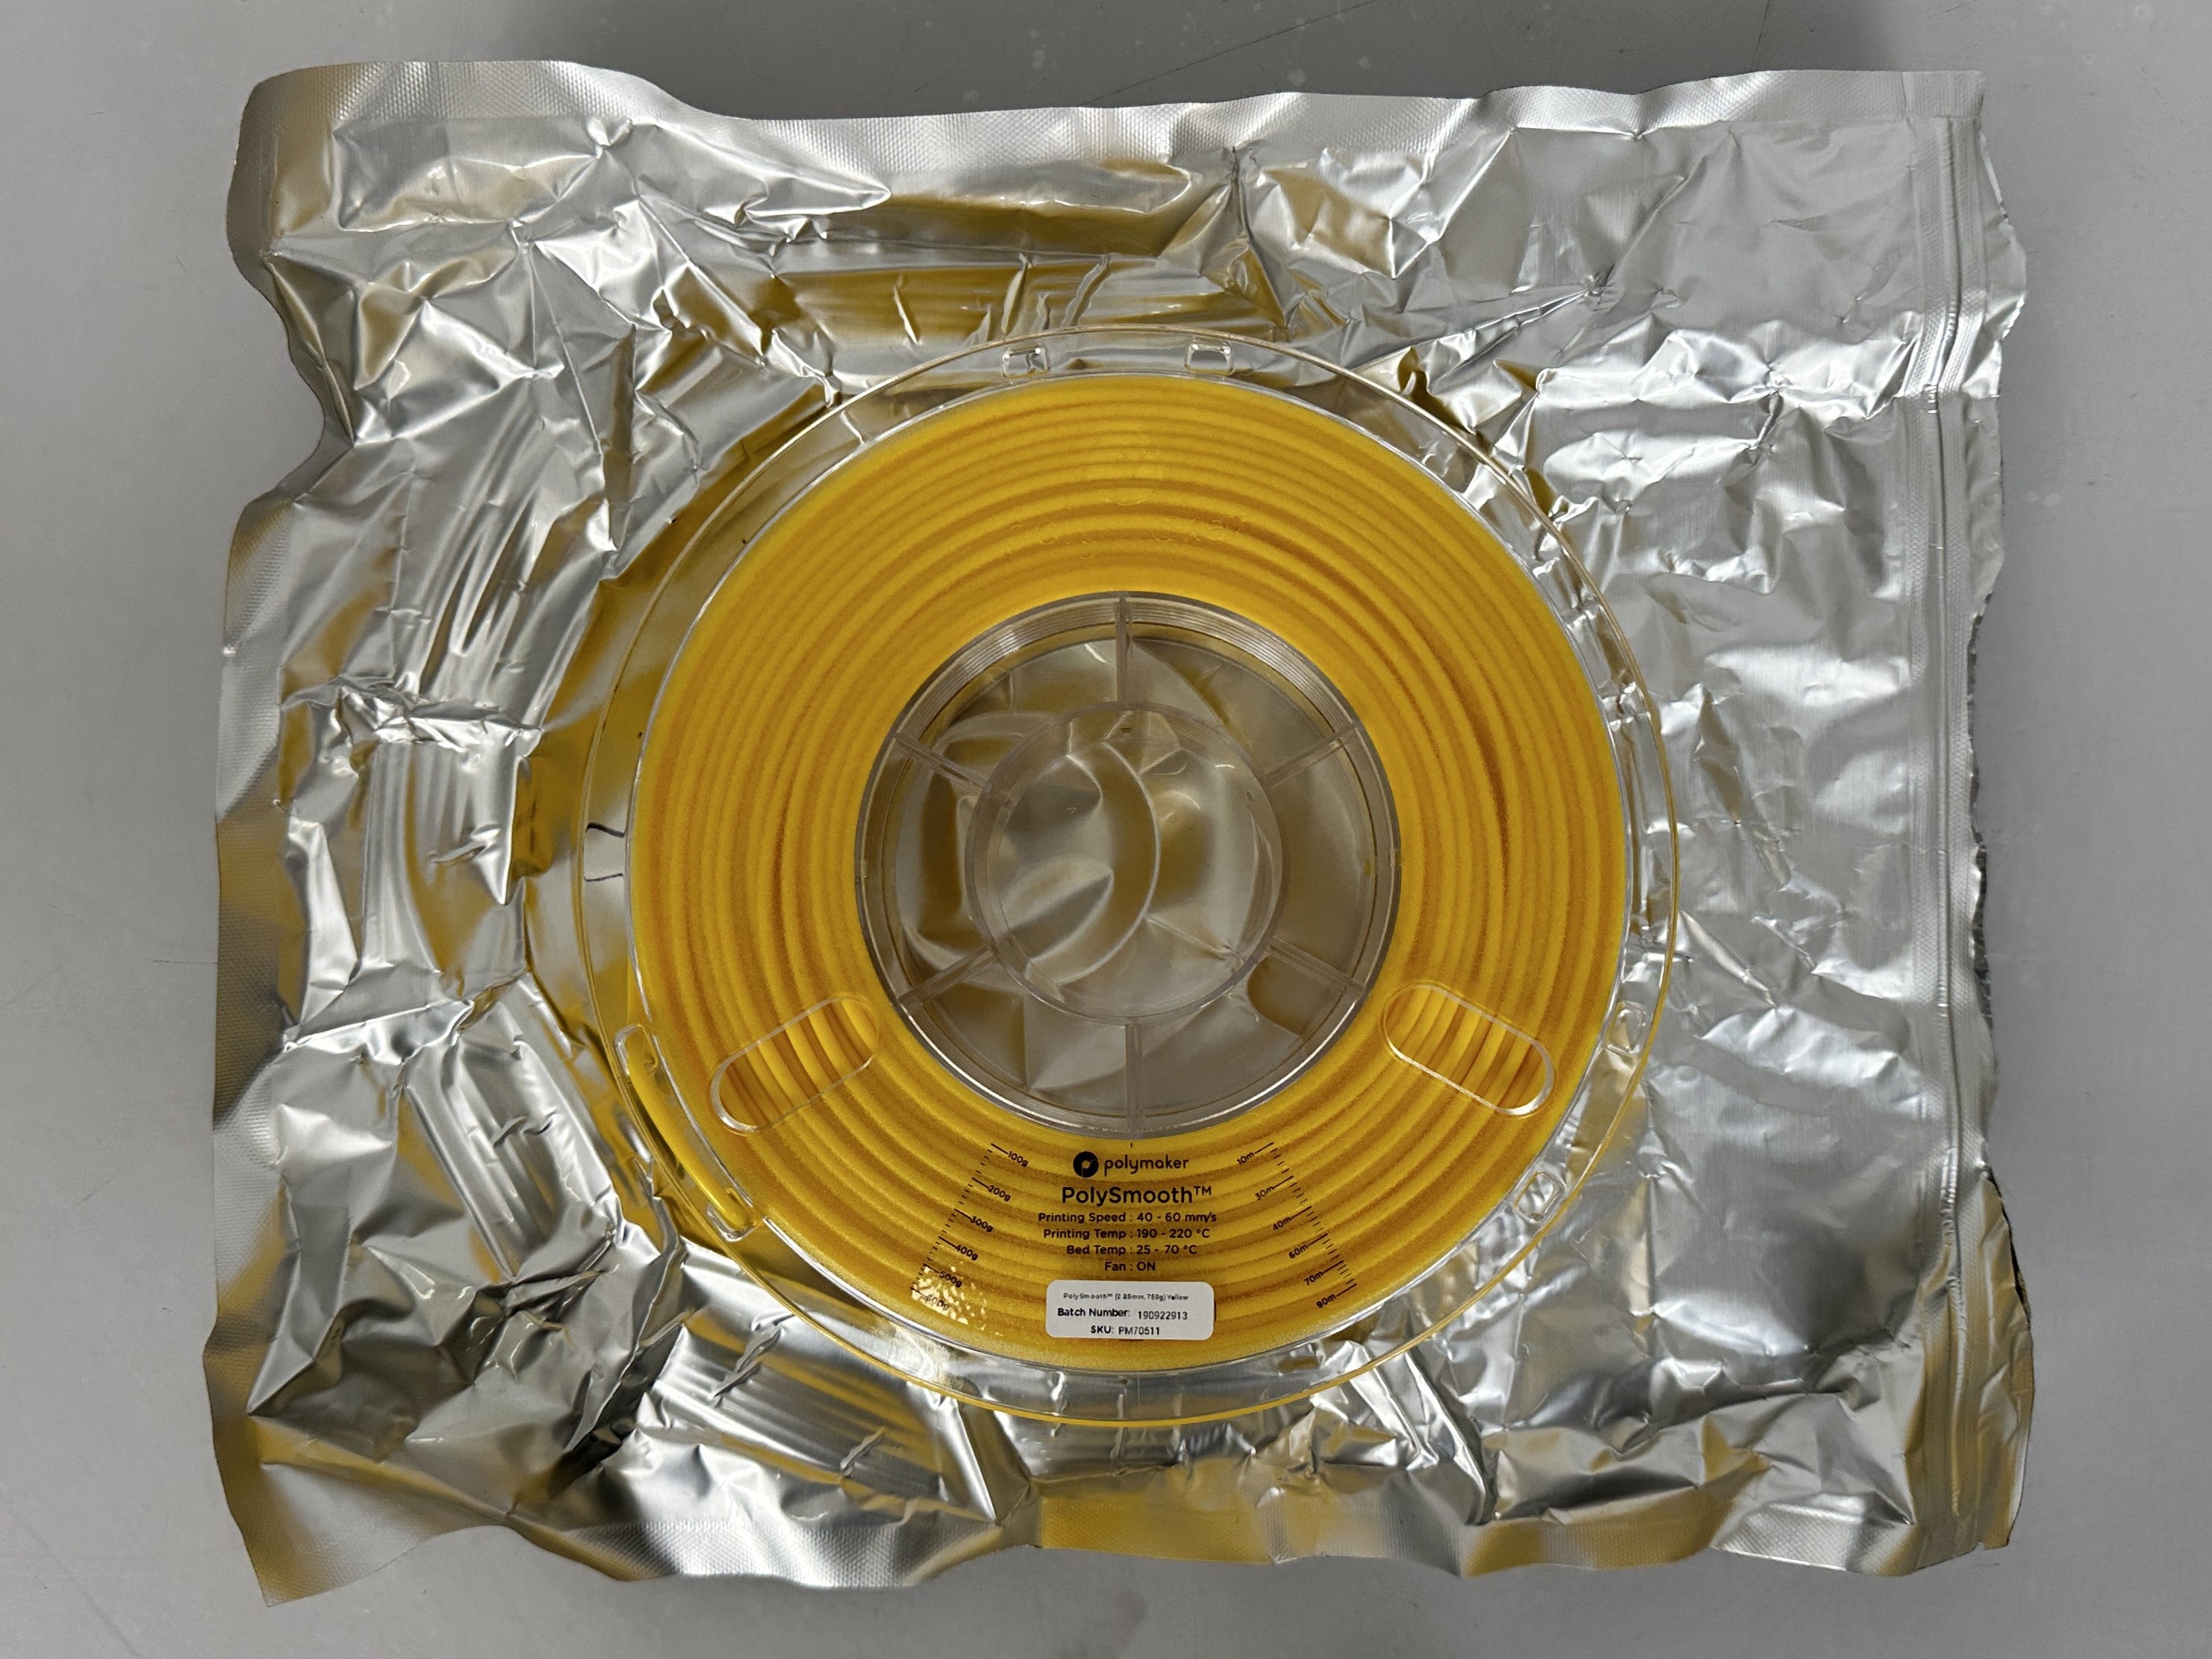 Polymaker PolySmooth PVB 2.85mm Yellow Filament Spool *New, Unsealed*